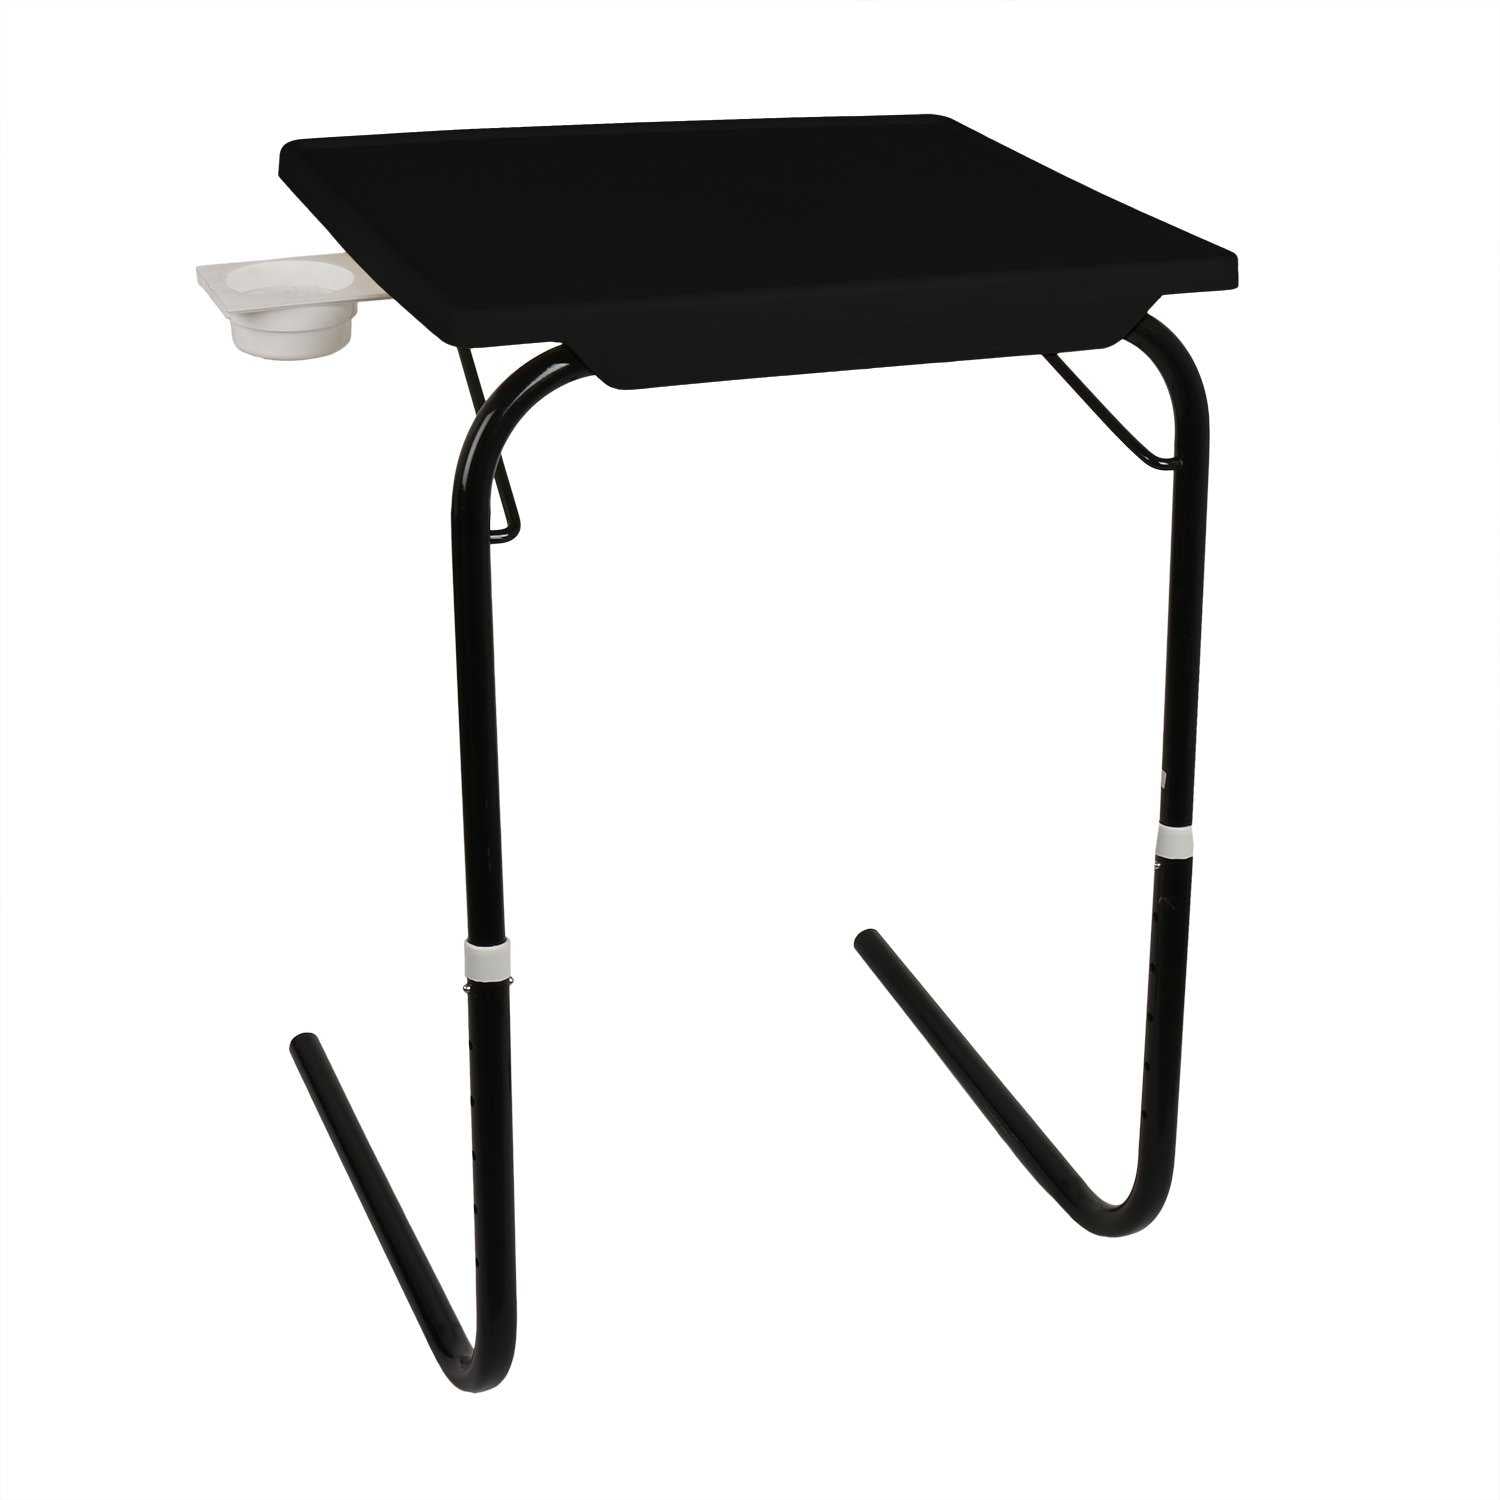  Tablemate Black colored | Wudore